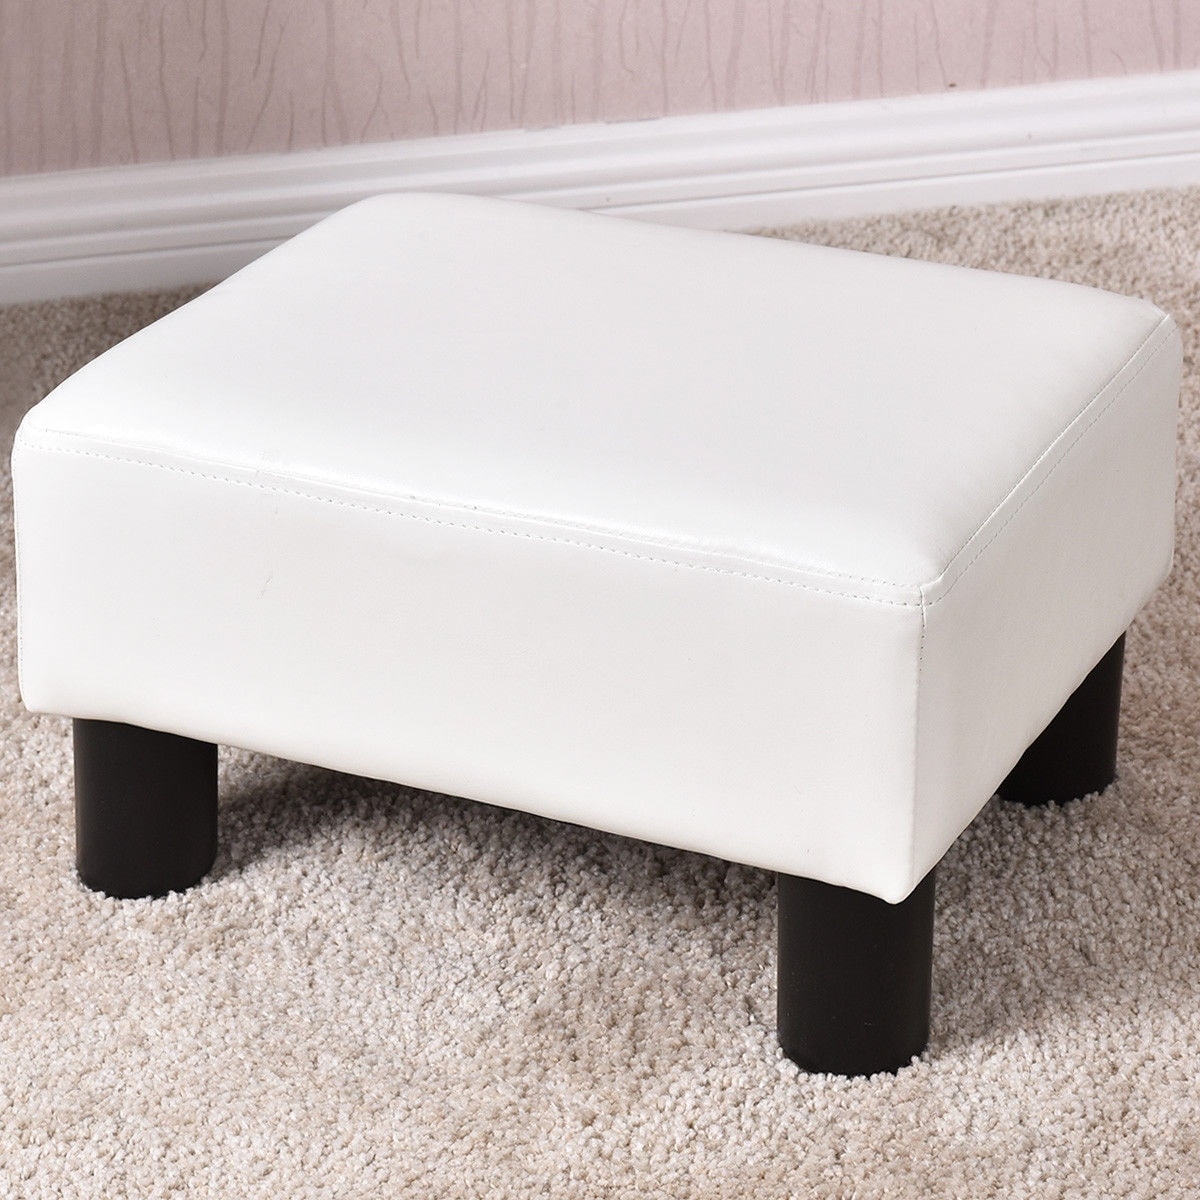 https://ak1.ostkcdn.com/images/products/is/images/direct/ce5b8386d202d3652799b48610a3d53b2105630b/Costway-Small-Ottoman-Footrest-PU-Leather-Footstool-Rectangular-Seat-Stool-White.jpg